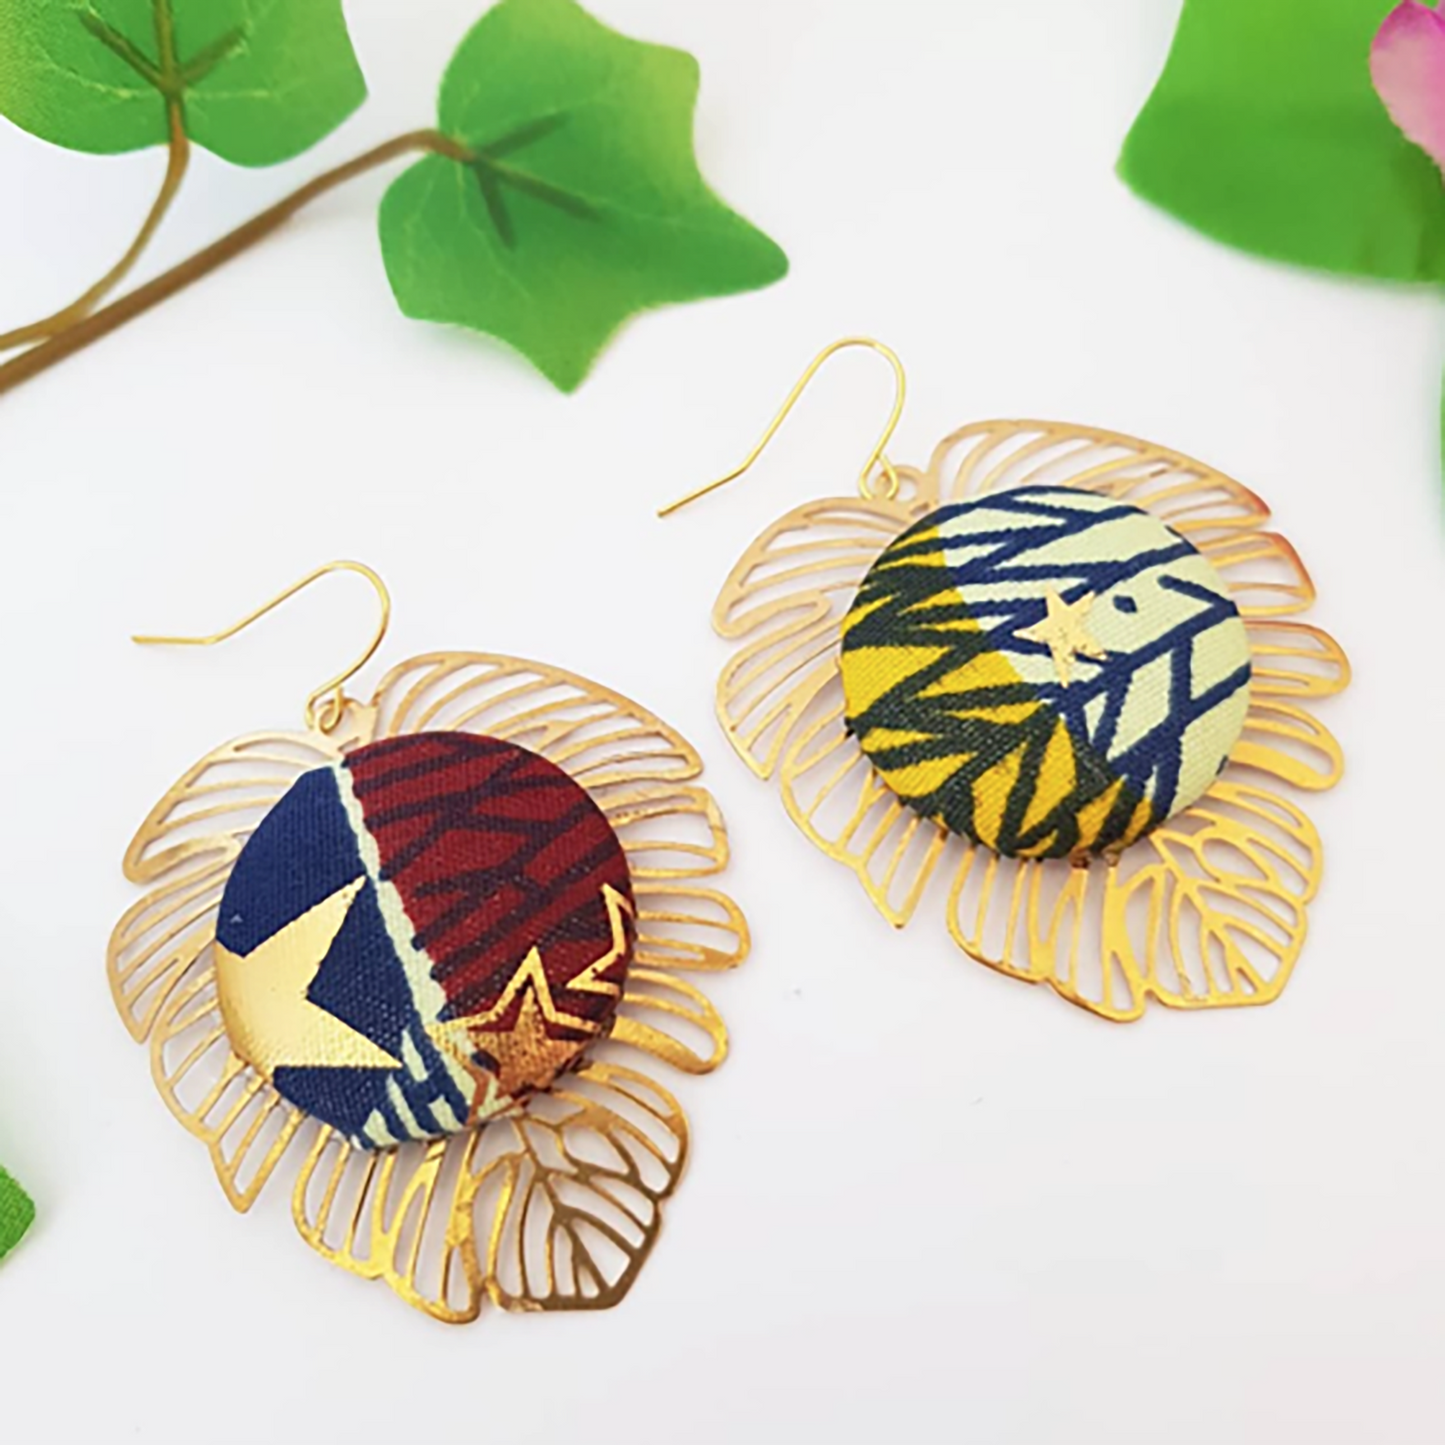 "Crafted with Love: Golden Monstera Earrings from Authentic African Fabric"